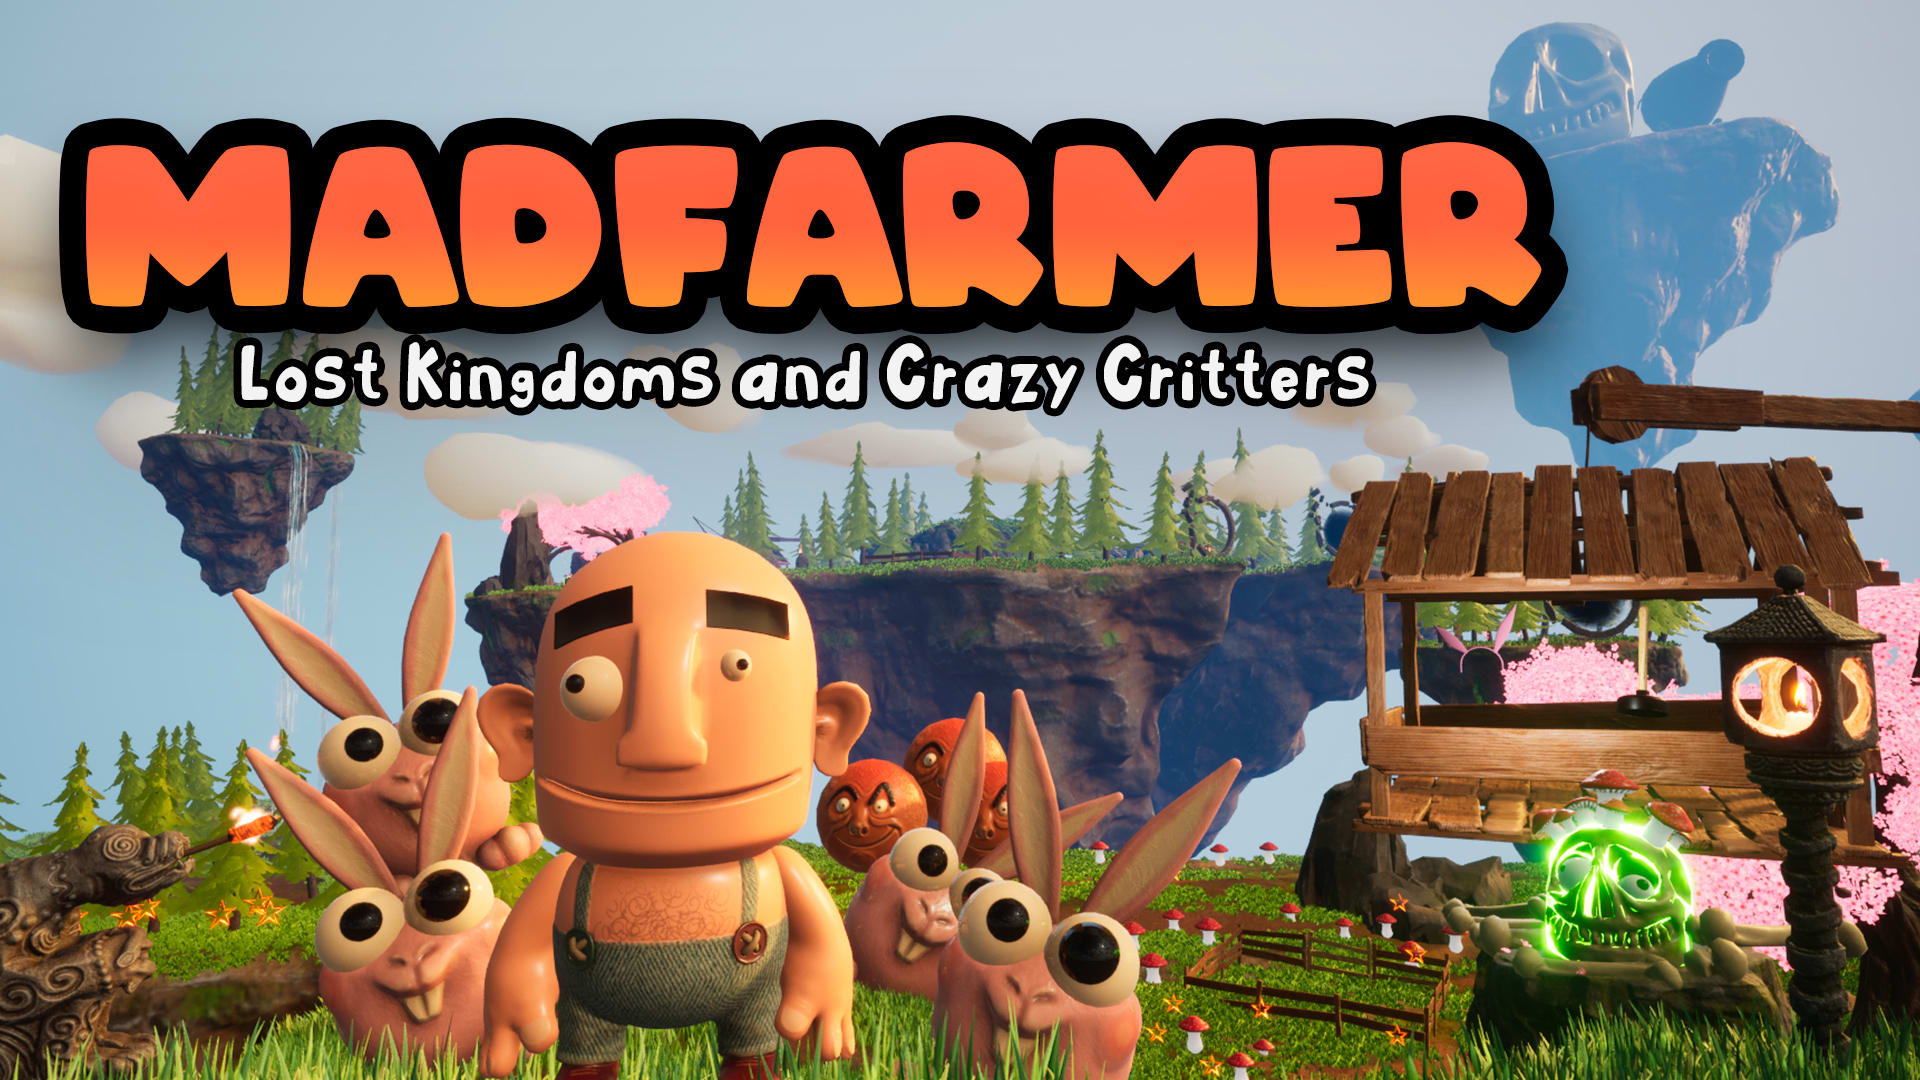 Madfarmer: Lost Kingdoms and Crazy Critters